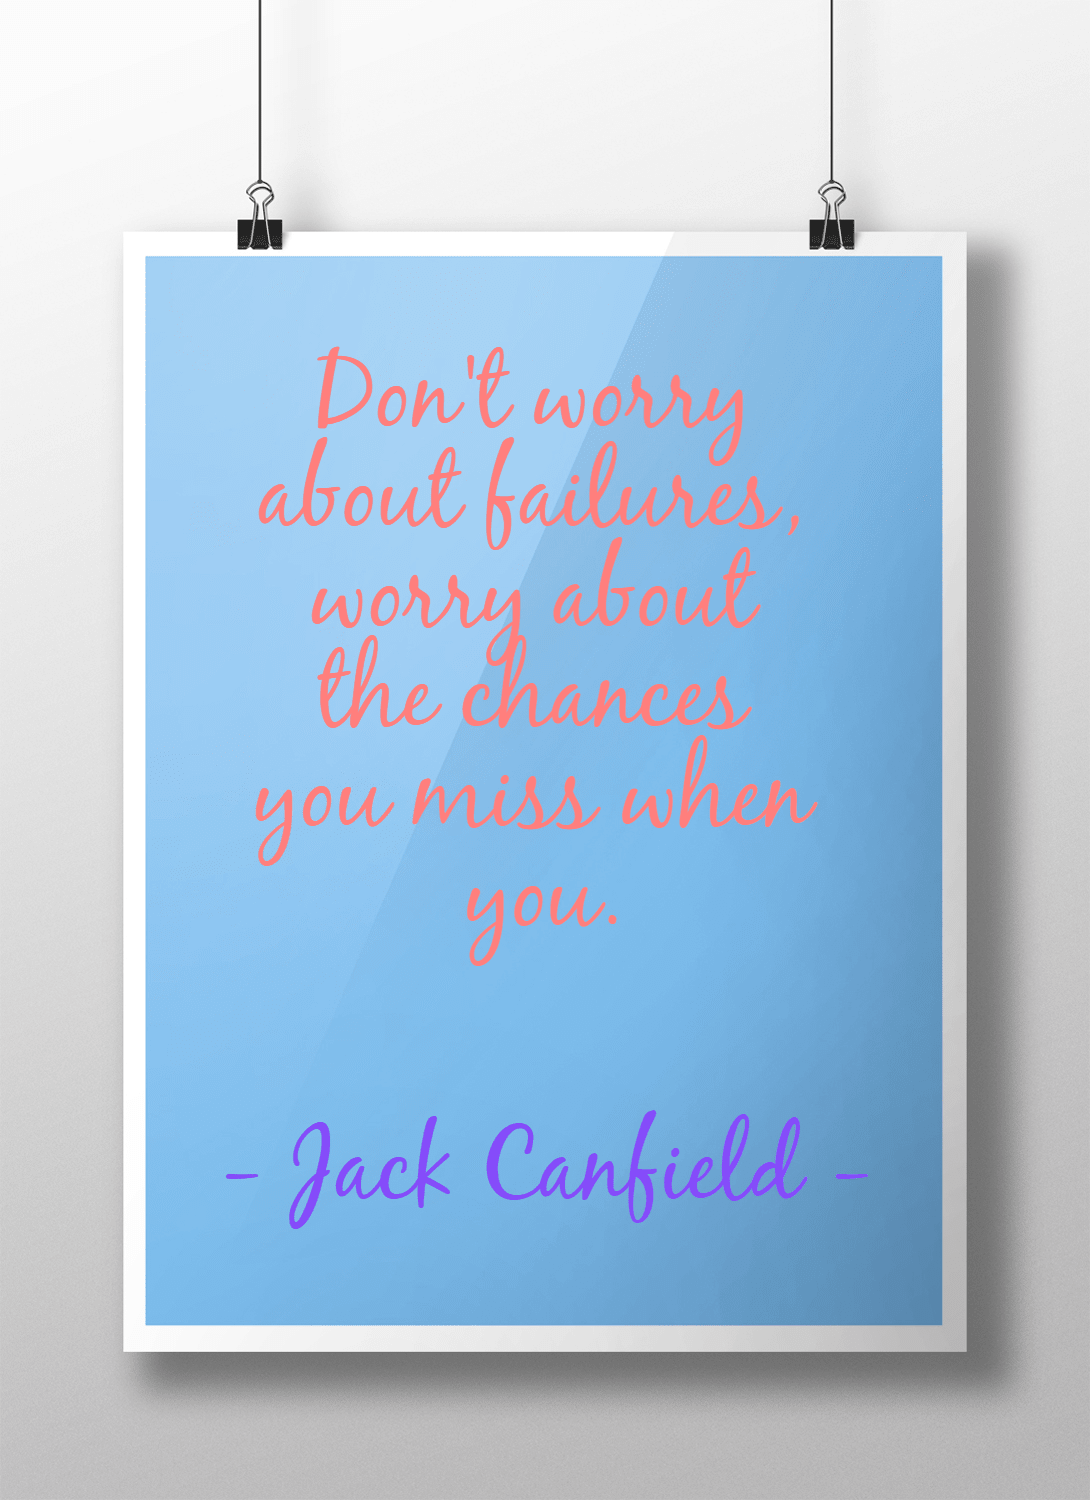 Poster #inspirational #quote #flat Design 